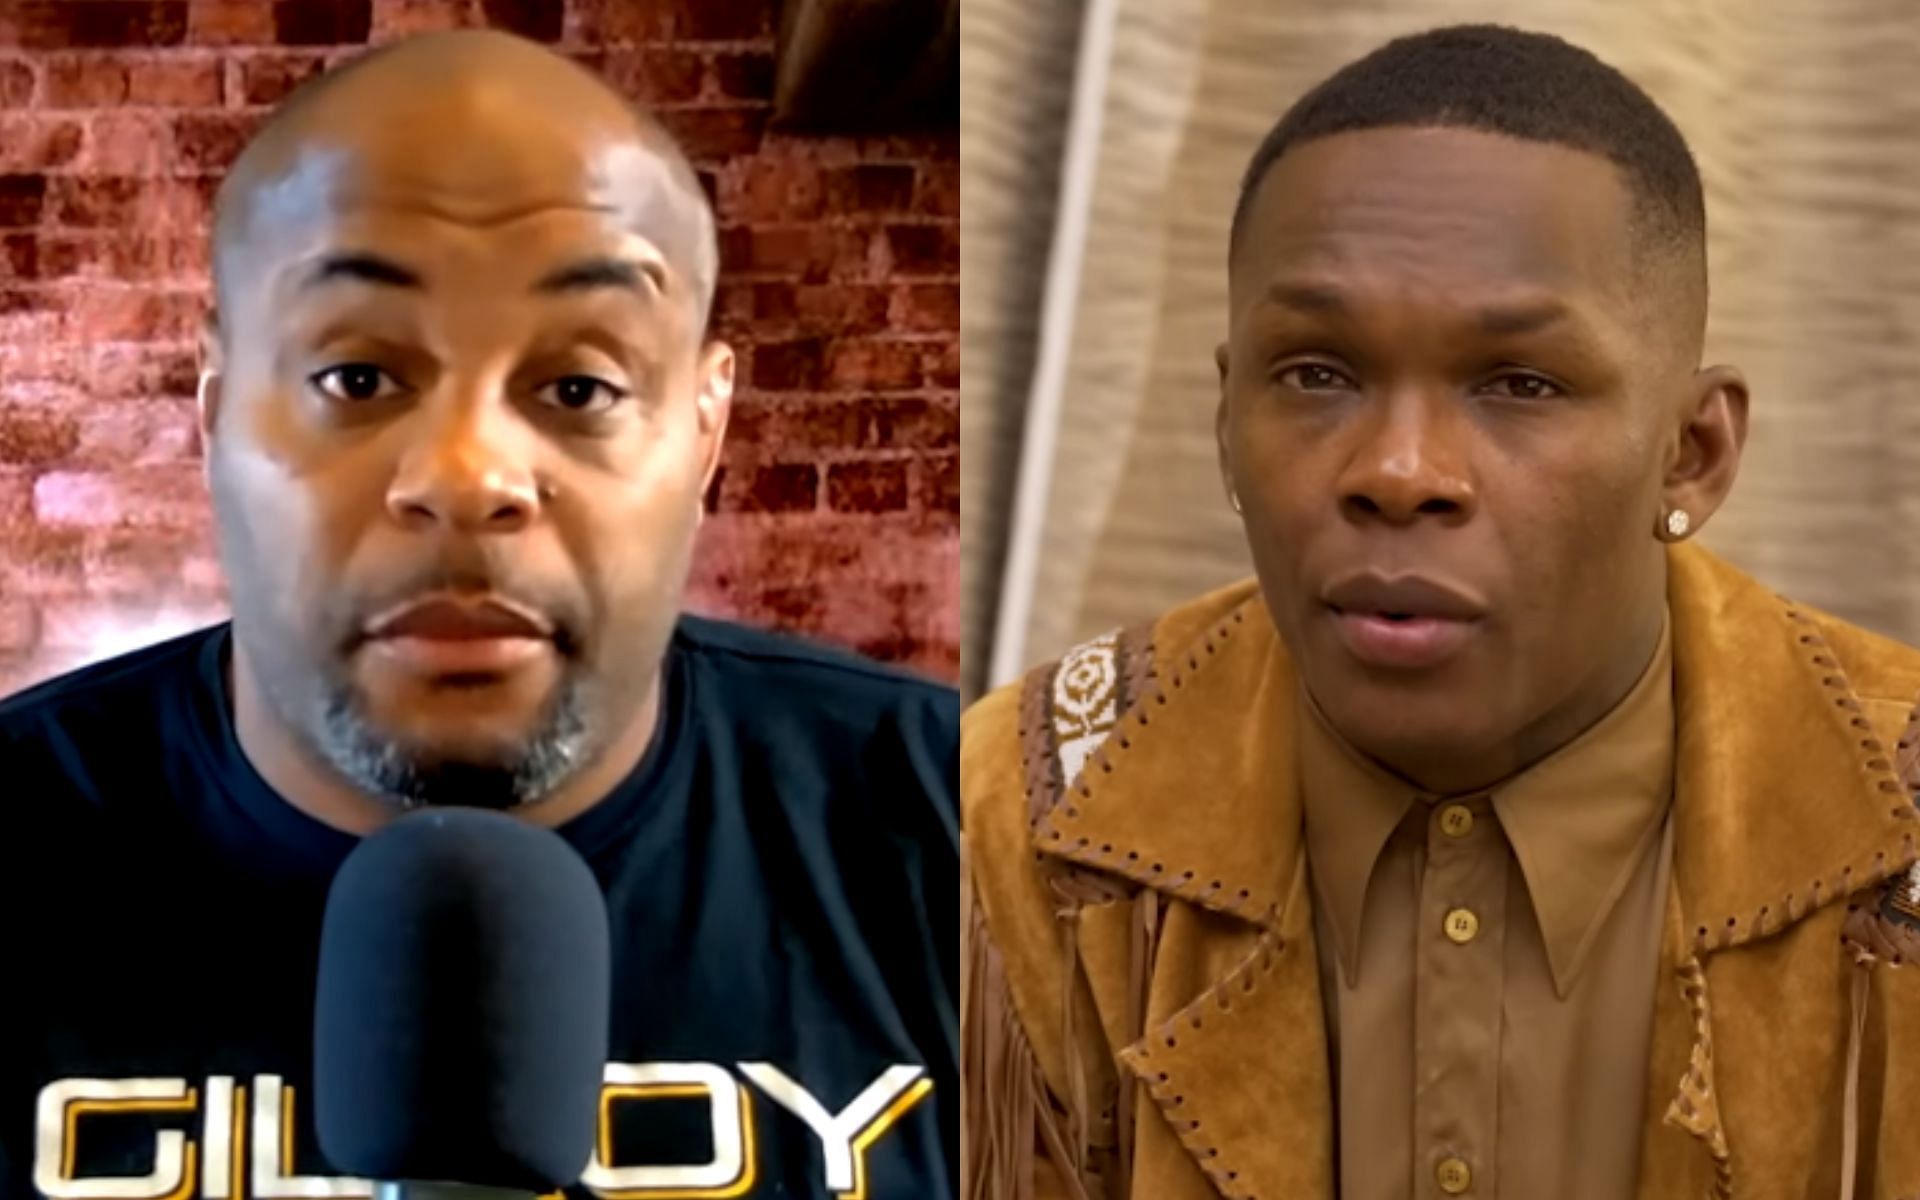 Daniel Cormier [Left] says a top middleweight will motivate Israel Adesanya [Right] to return [Image courtesy: Daniel Cormier and FREESTYLEBENDER - YouTube]